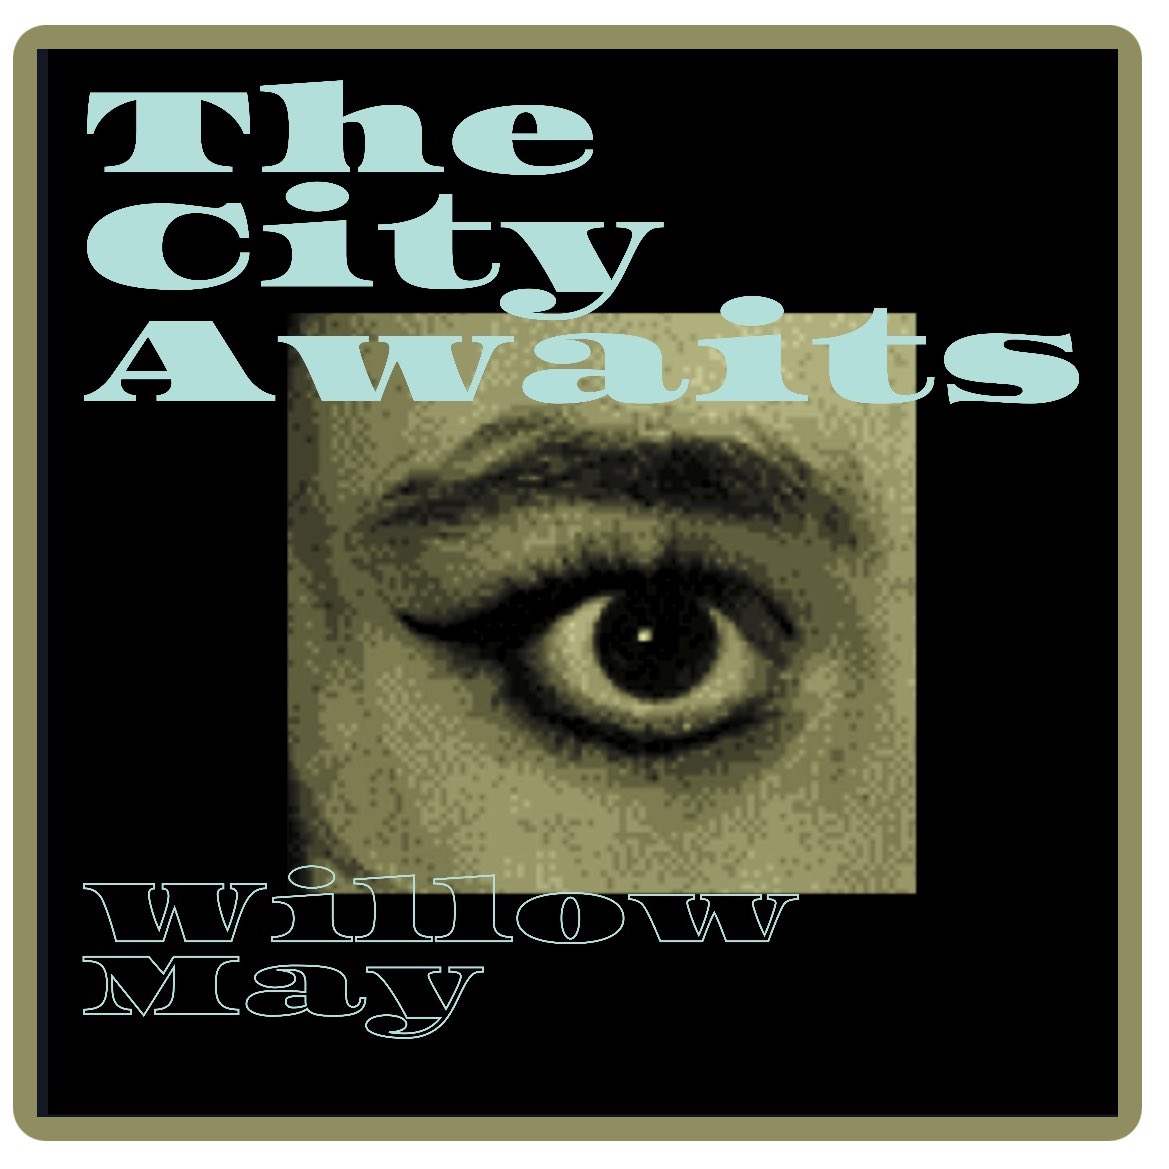 1 month from today, on the 3rd of May, we will be releasing our album “The City Awaits.” And on the 19th of April, we will be releasing a single “Bye Bye Baby.” @almurray and I are so proud of this album!Stay tuned for pre-save links, art, track lists, sneak peeks, gig updates